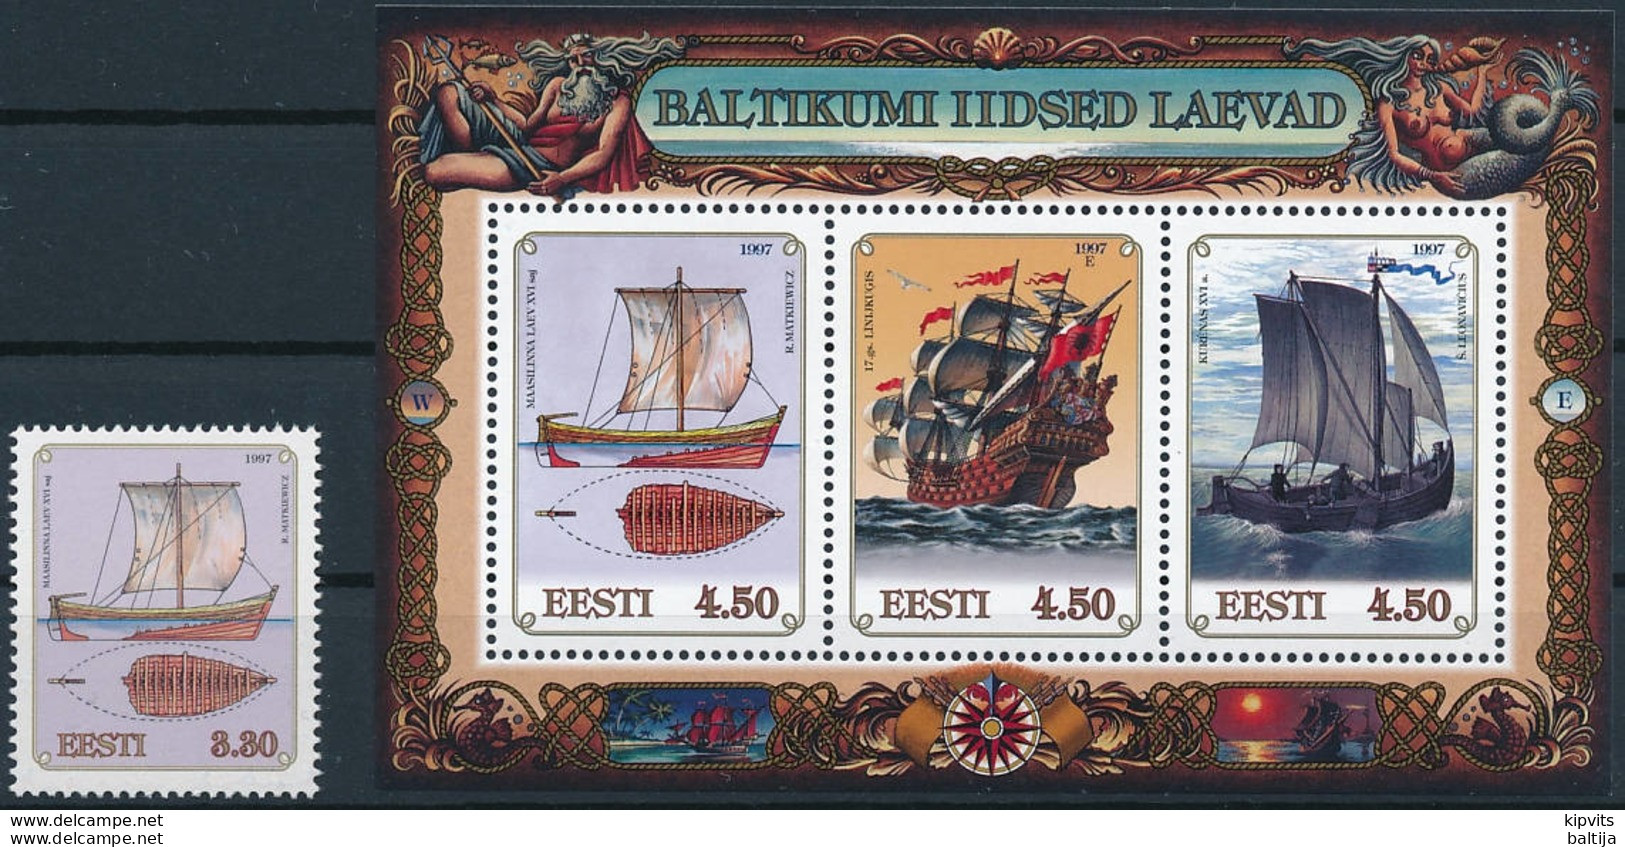 Mi 302 & Block 10 MNH ** / Ships Of The Baltic Sea, Joint Issue - Estland